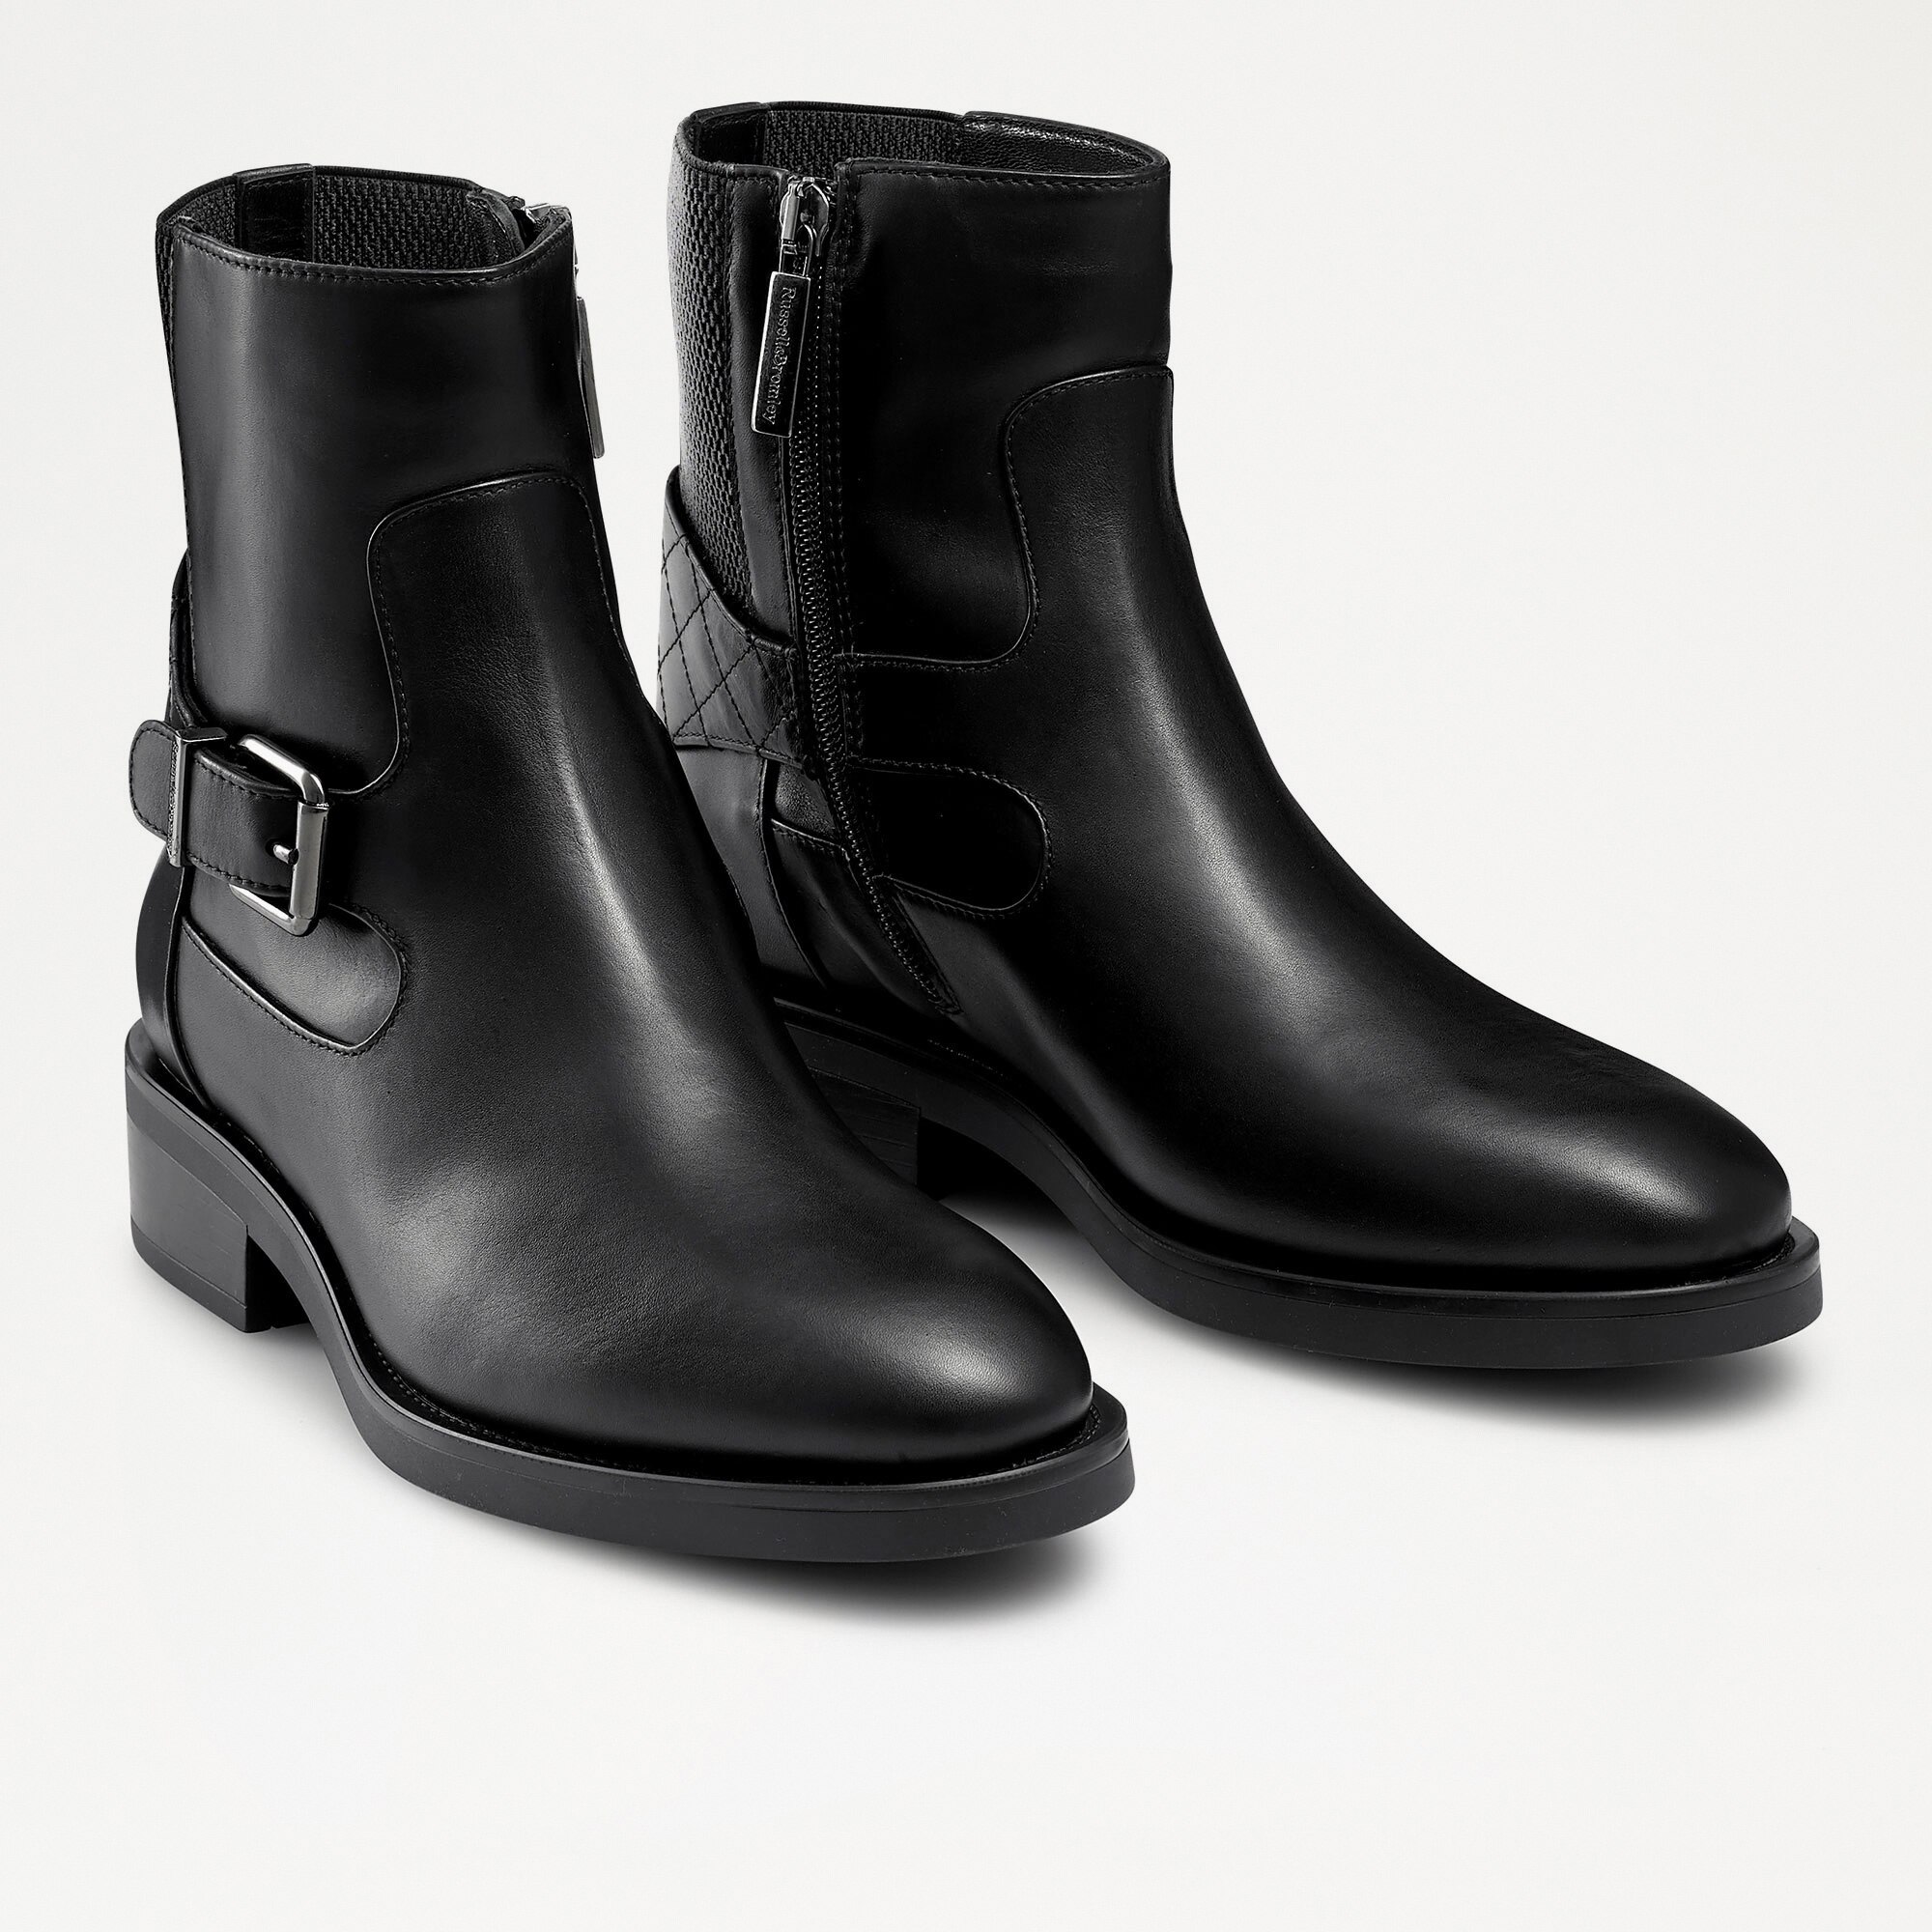 STORM Dryleks Riding Boot in Black Leather | Russell & Bromley